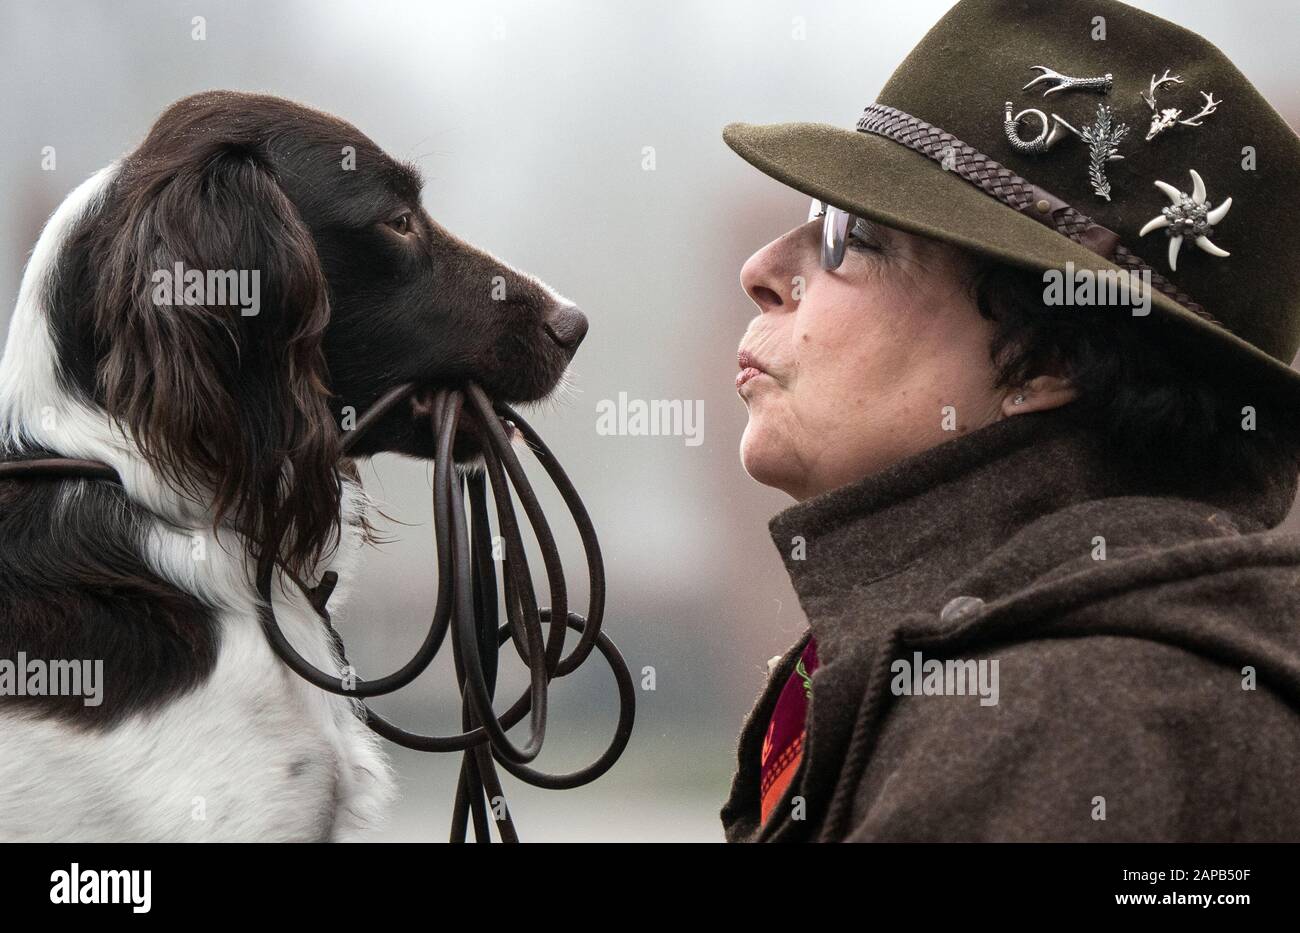 Dortmund, Germany. 22nd Jan, 2020. "Anna", little girl from Münsterland,  and "mistress" Claudia Kimm look each other in the eyes during the photo  session in front of the "Jagd & Hund" and "